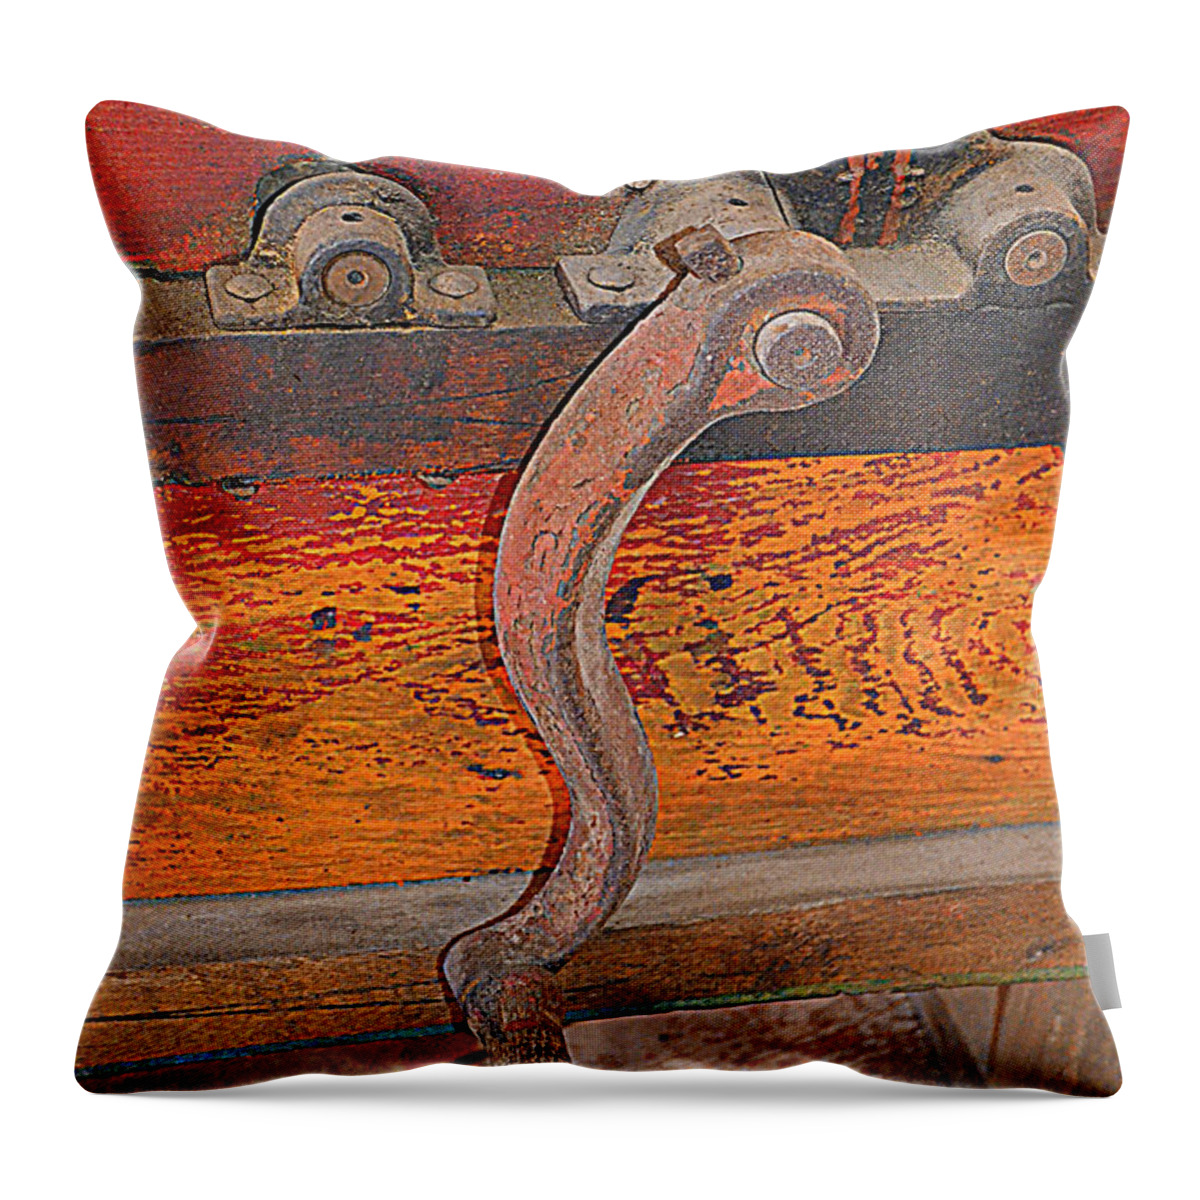 Rusty Crank Throw Pillow featuring the photograph Crank by Diane montana Jansson